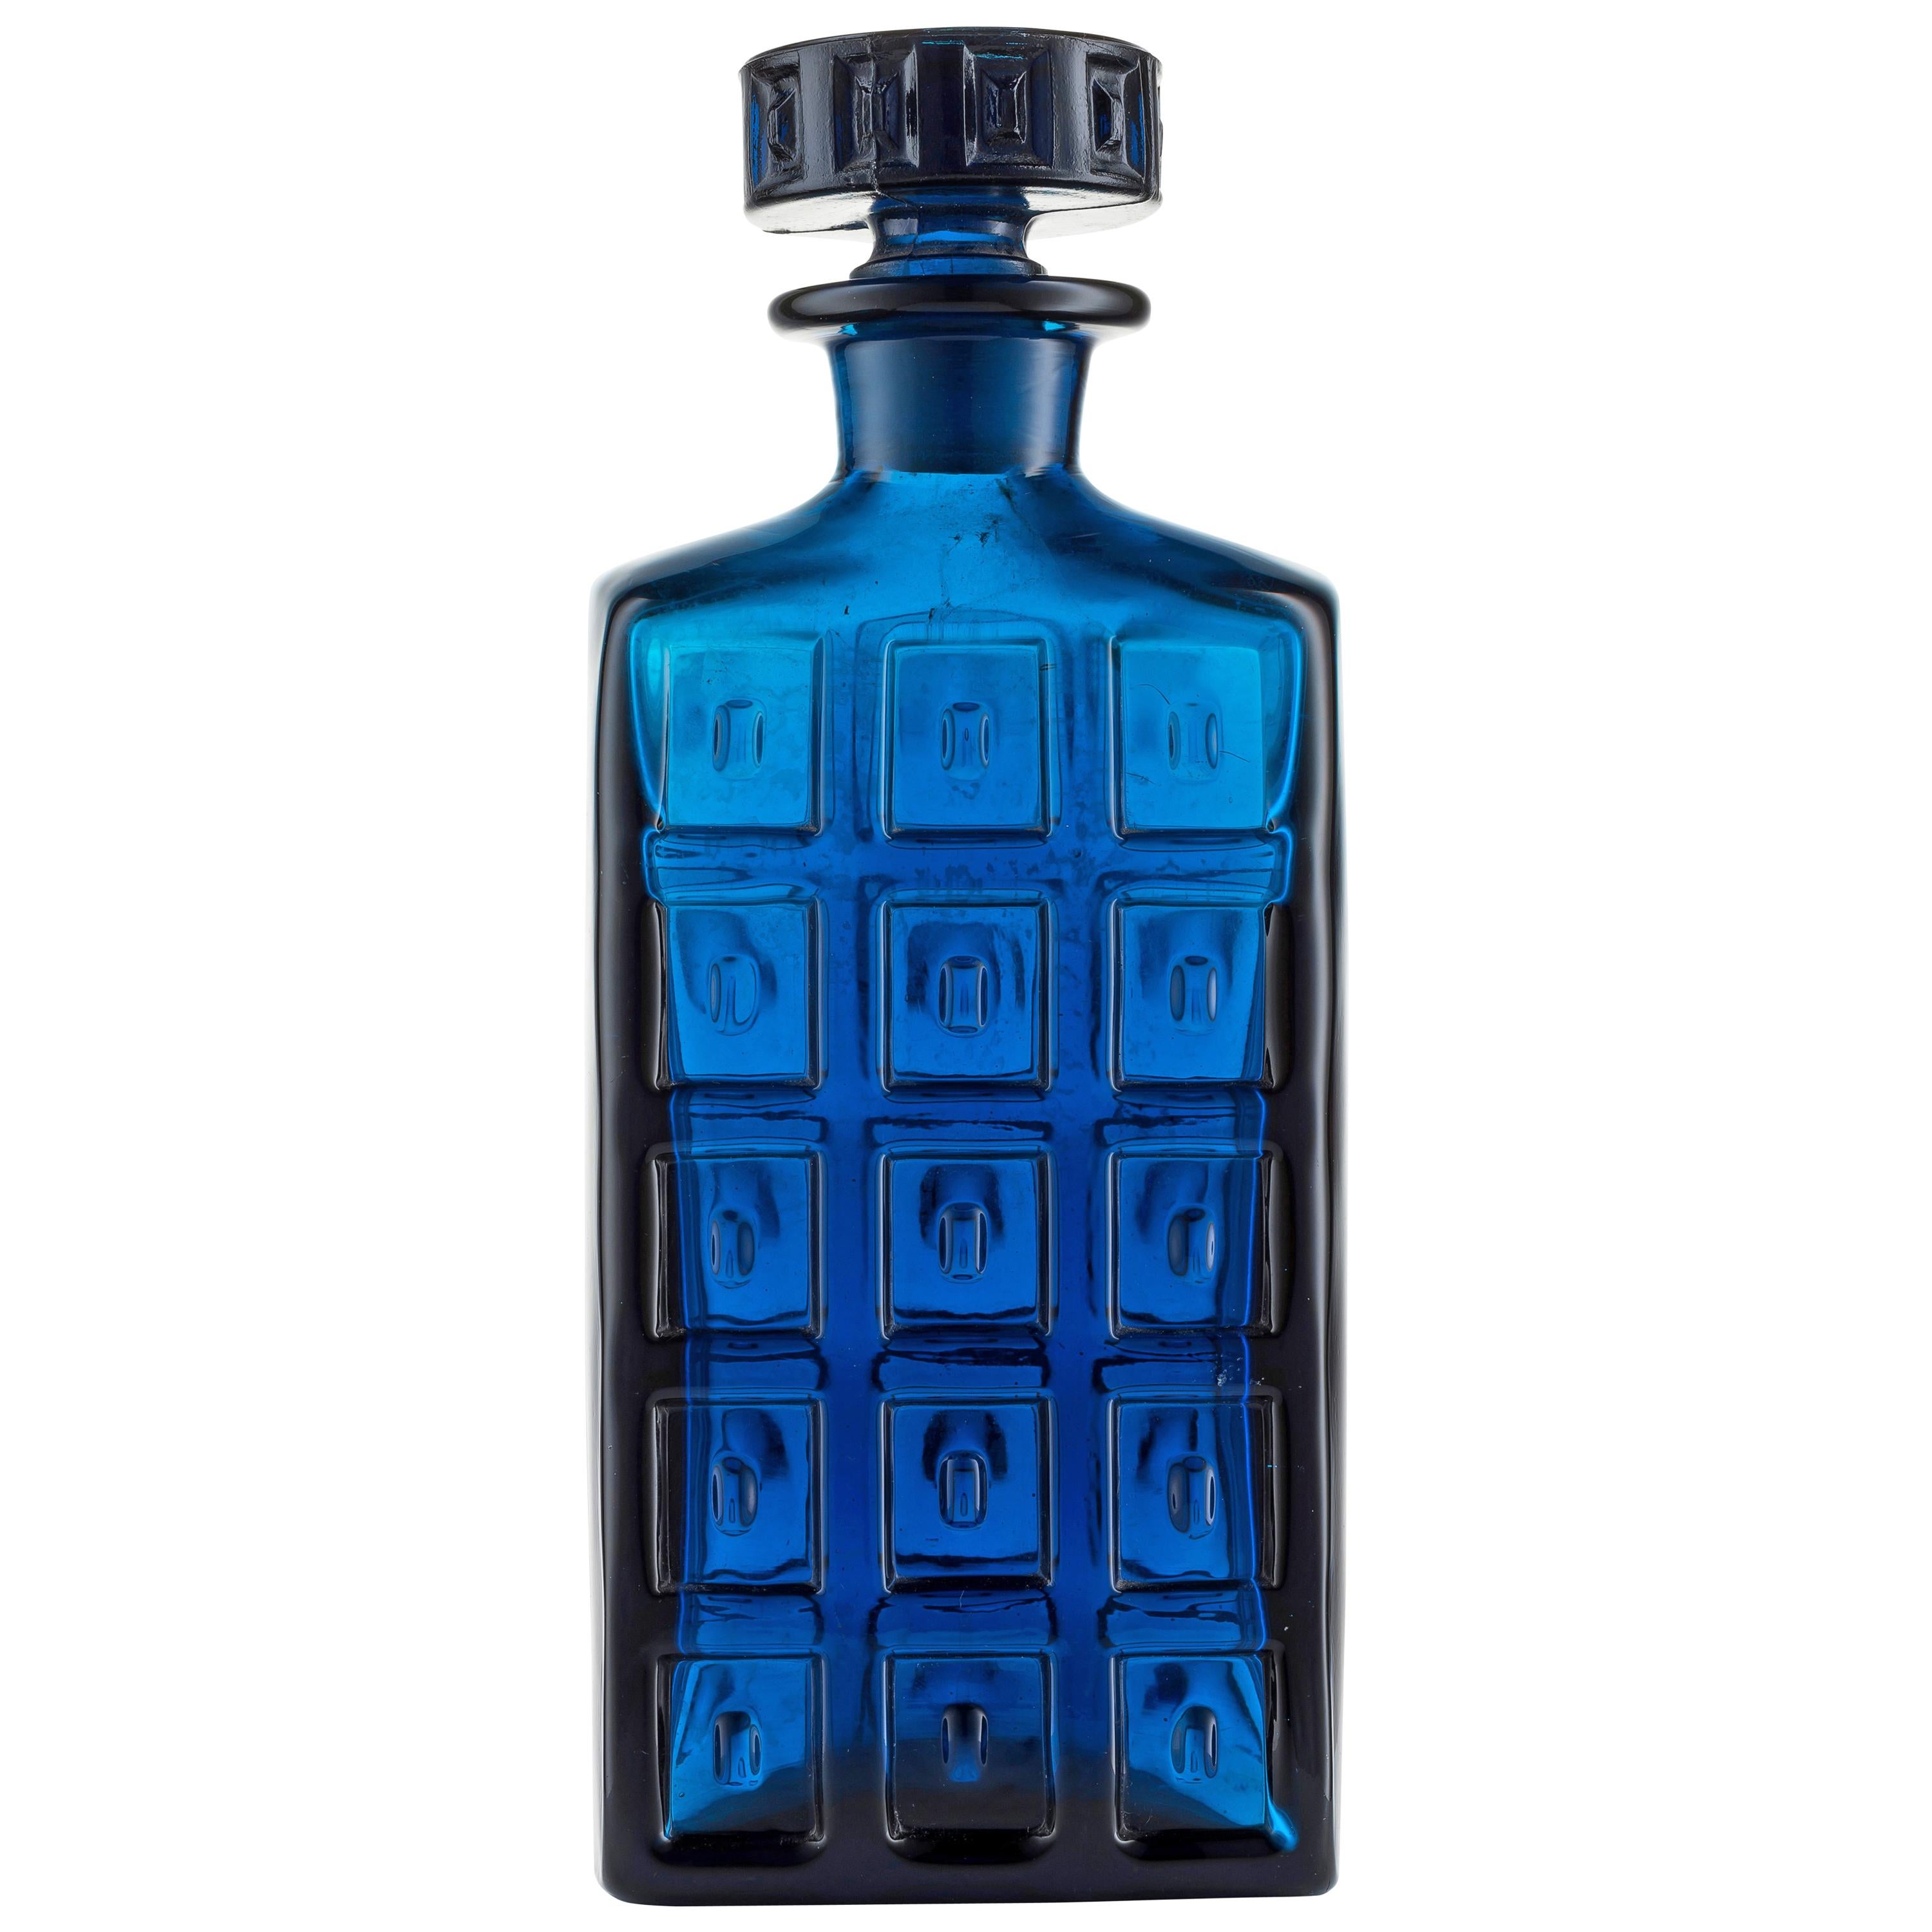 Handmade Art Glass Whisky Decanter in Cobalt Blue with Impressed Surface Design For Sale